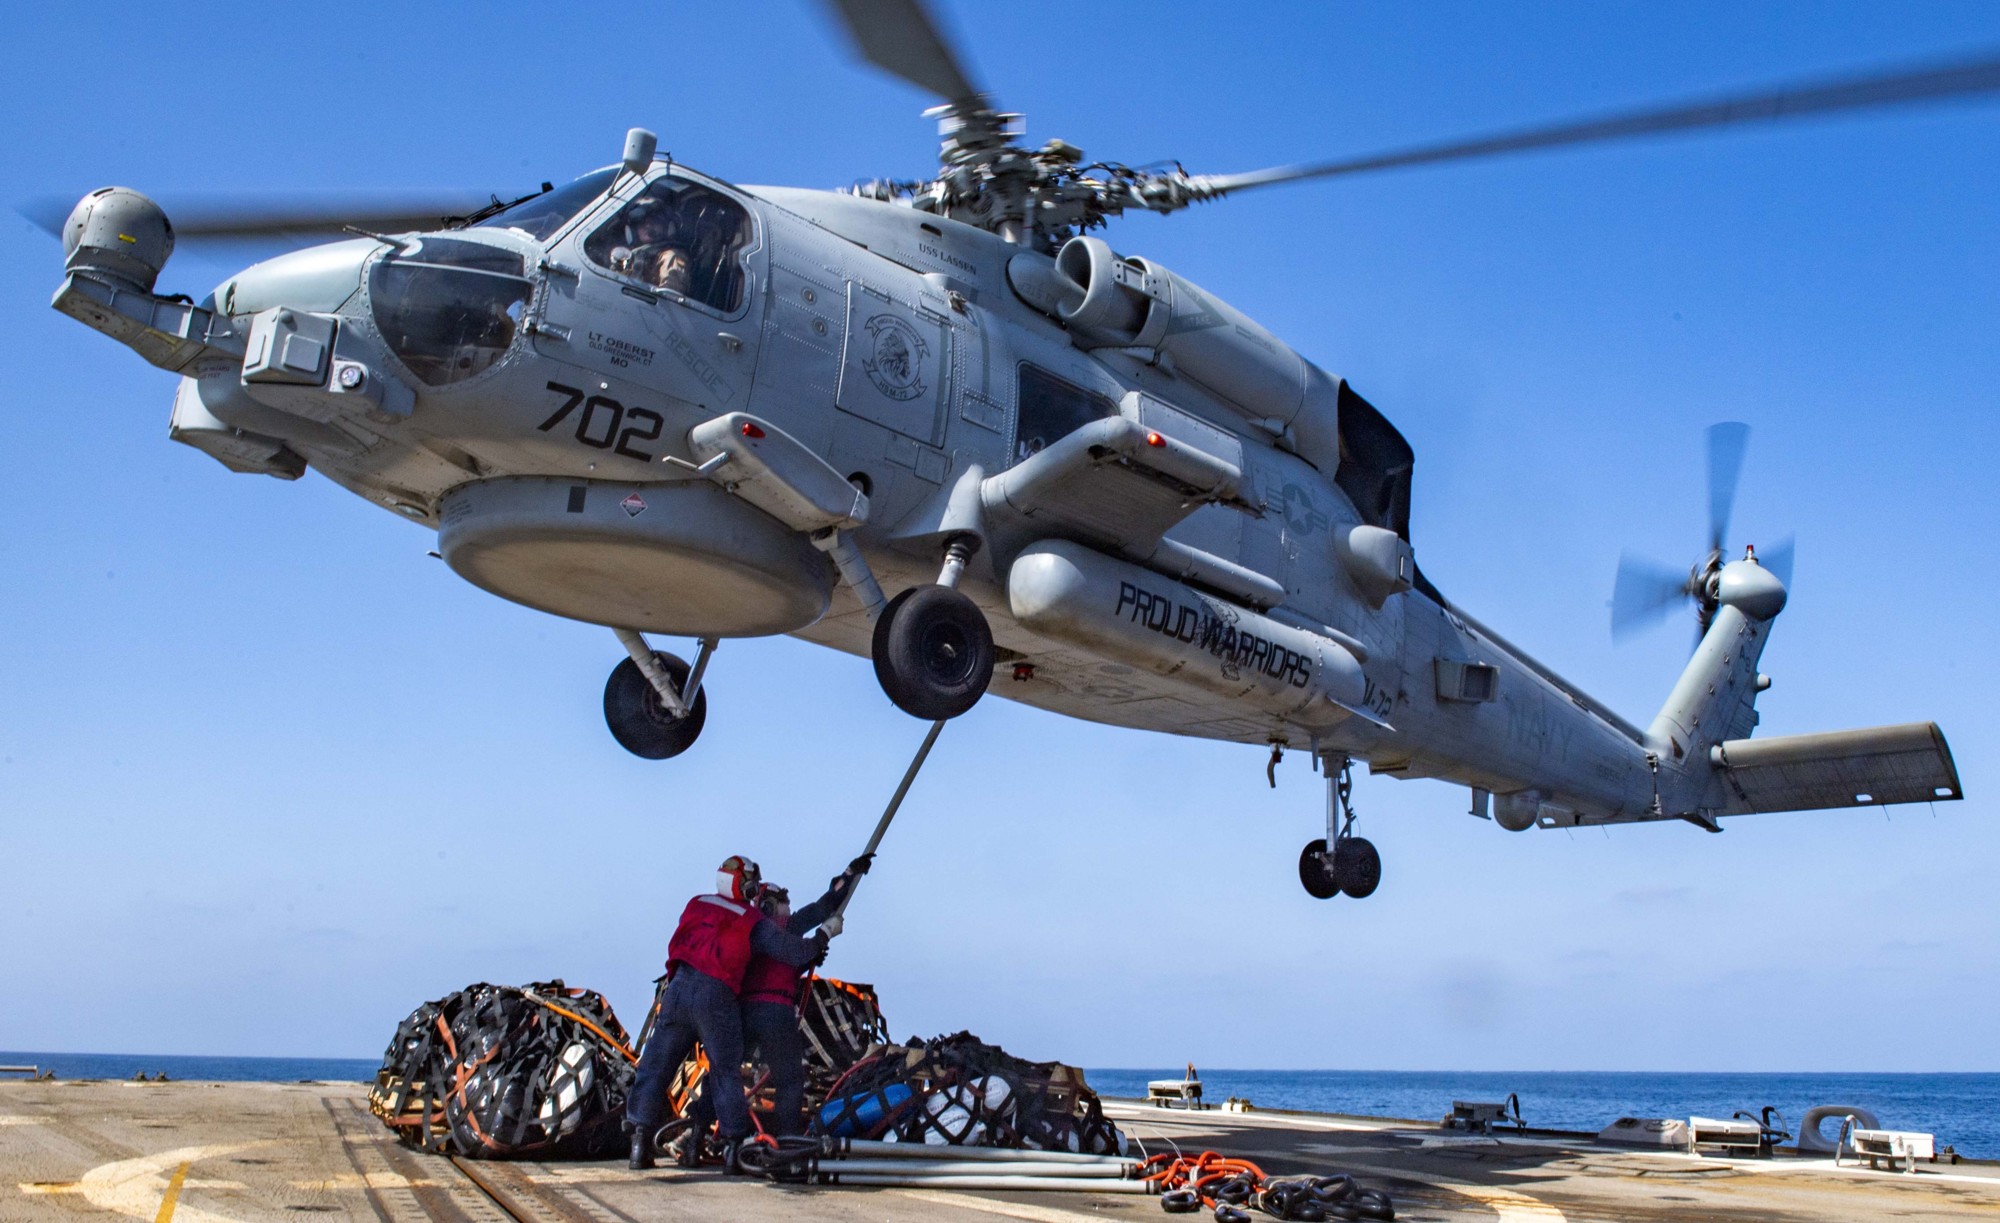 hsm-72 proud warriors helicopter maritime strike squadron mh-60r seahawk carrier air wing cvw-1 ddg-82 uss lassen 44